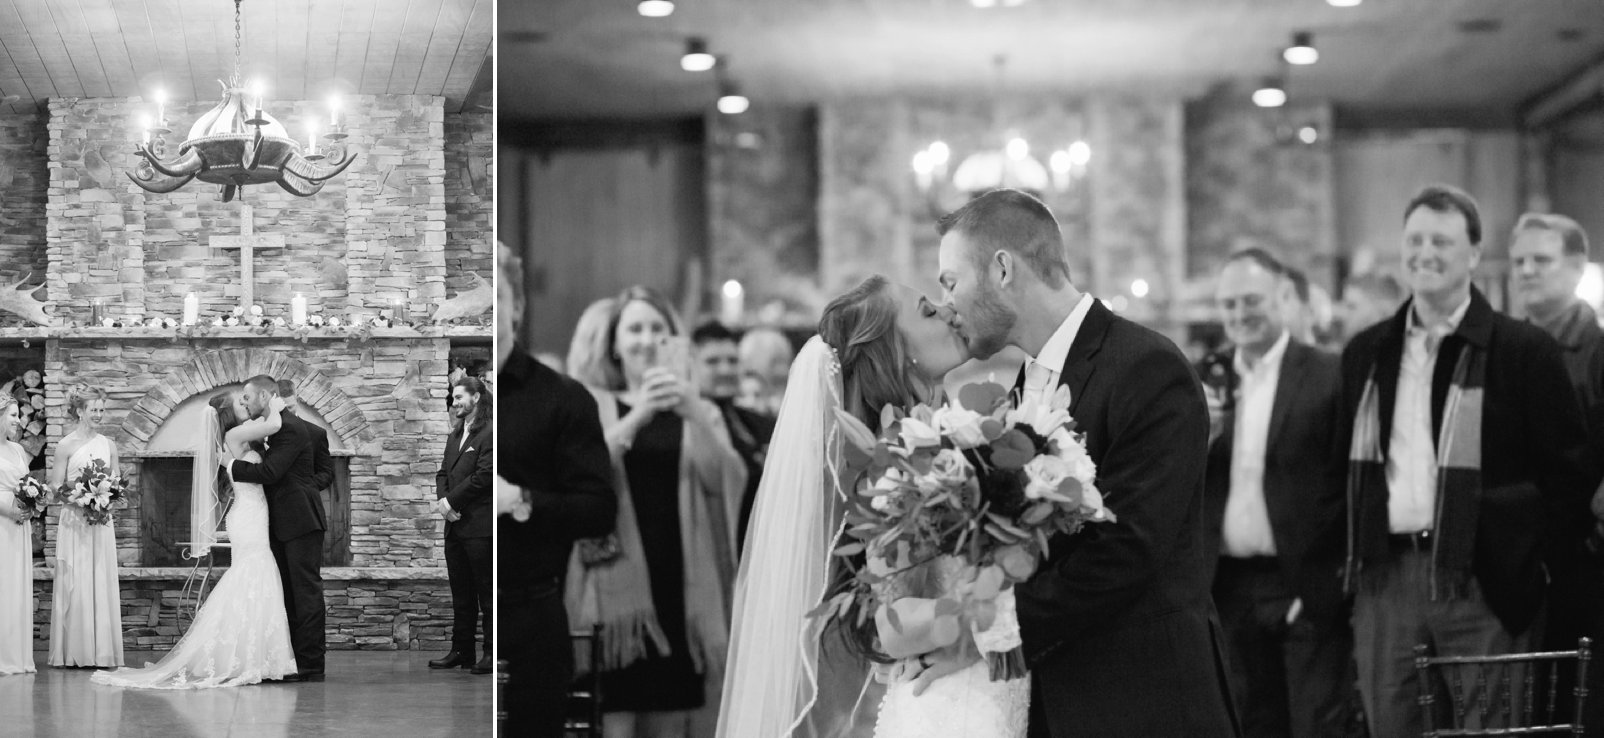 first kiss during ceremony at spruce mountain ranch winter wedding